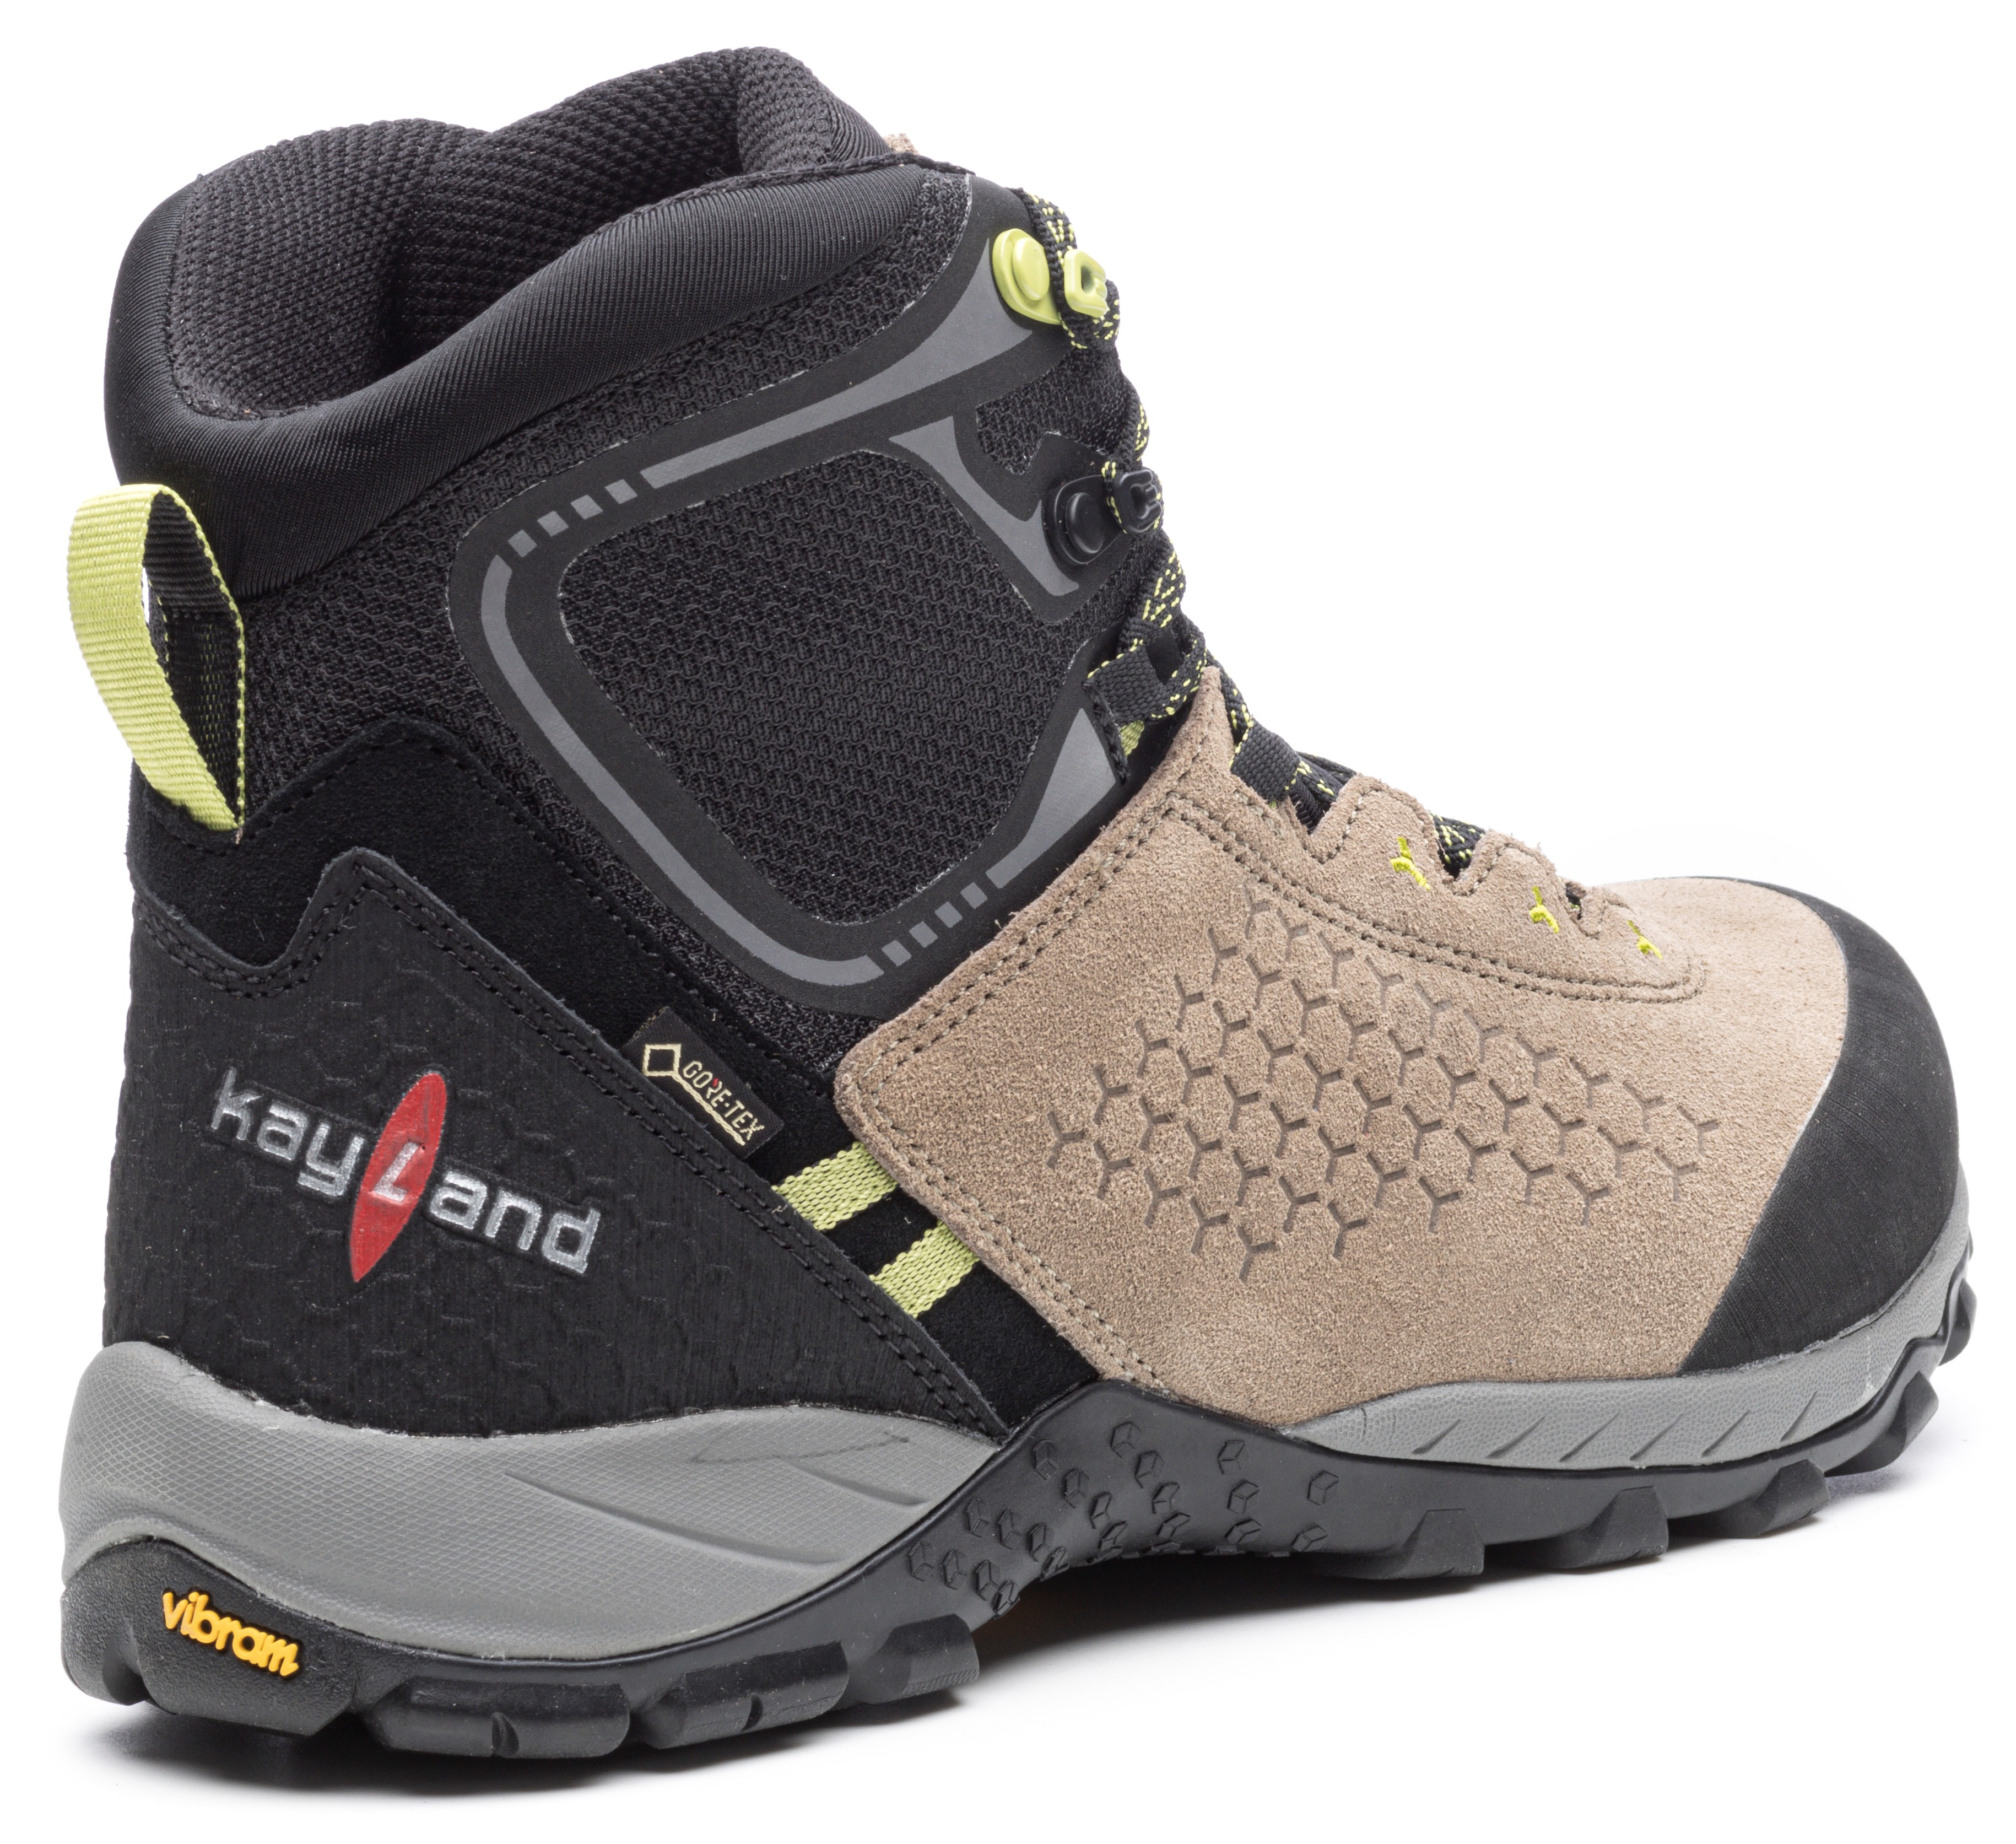 Inphinity Gtx, brown